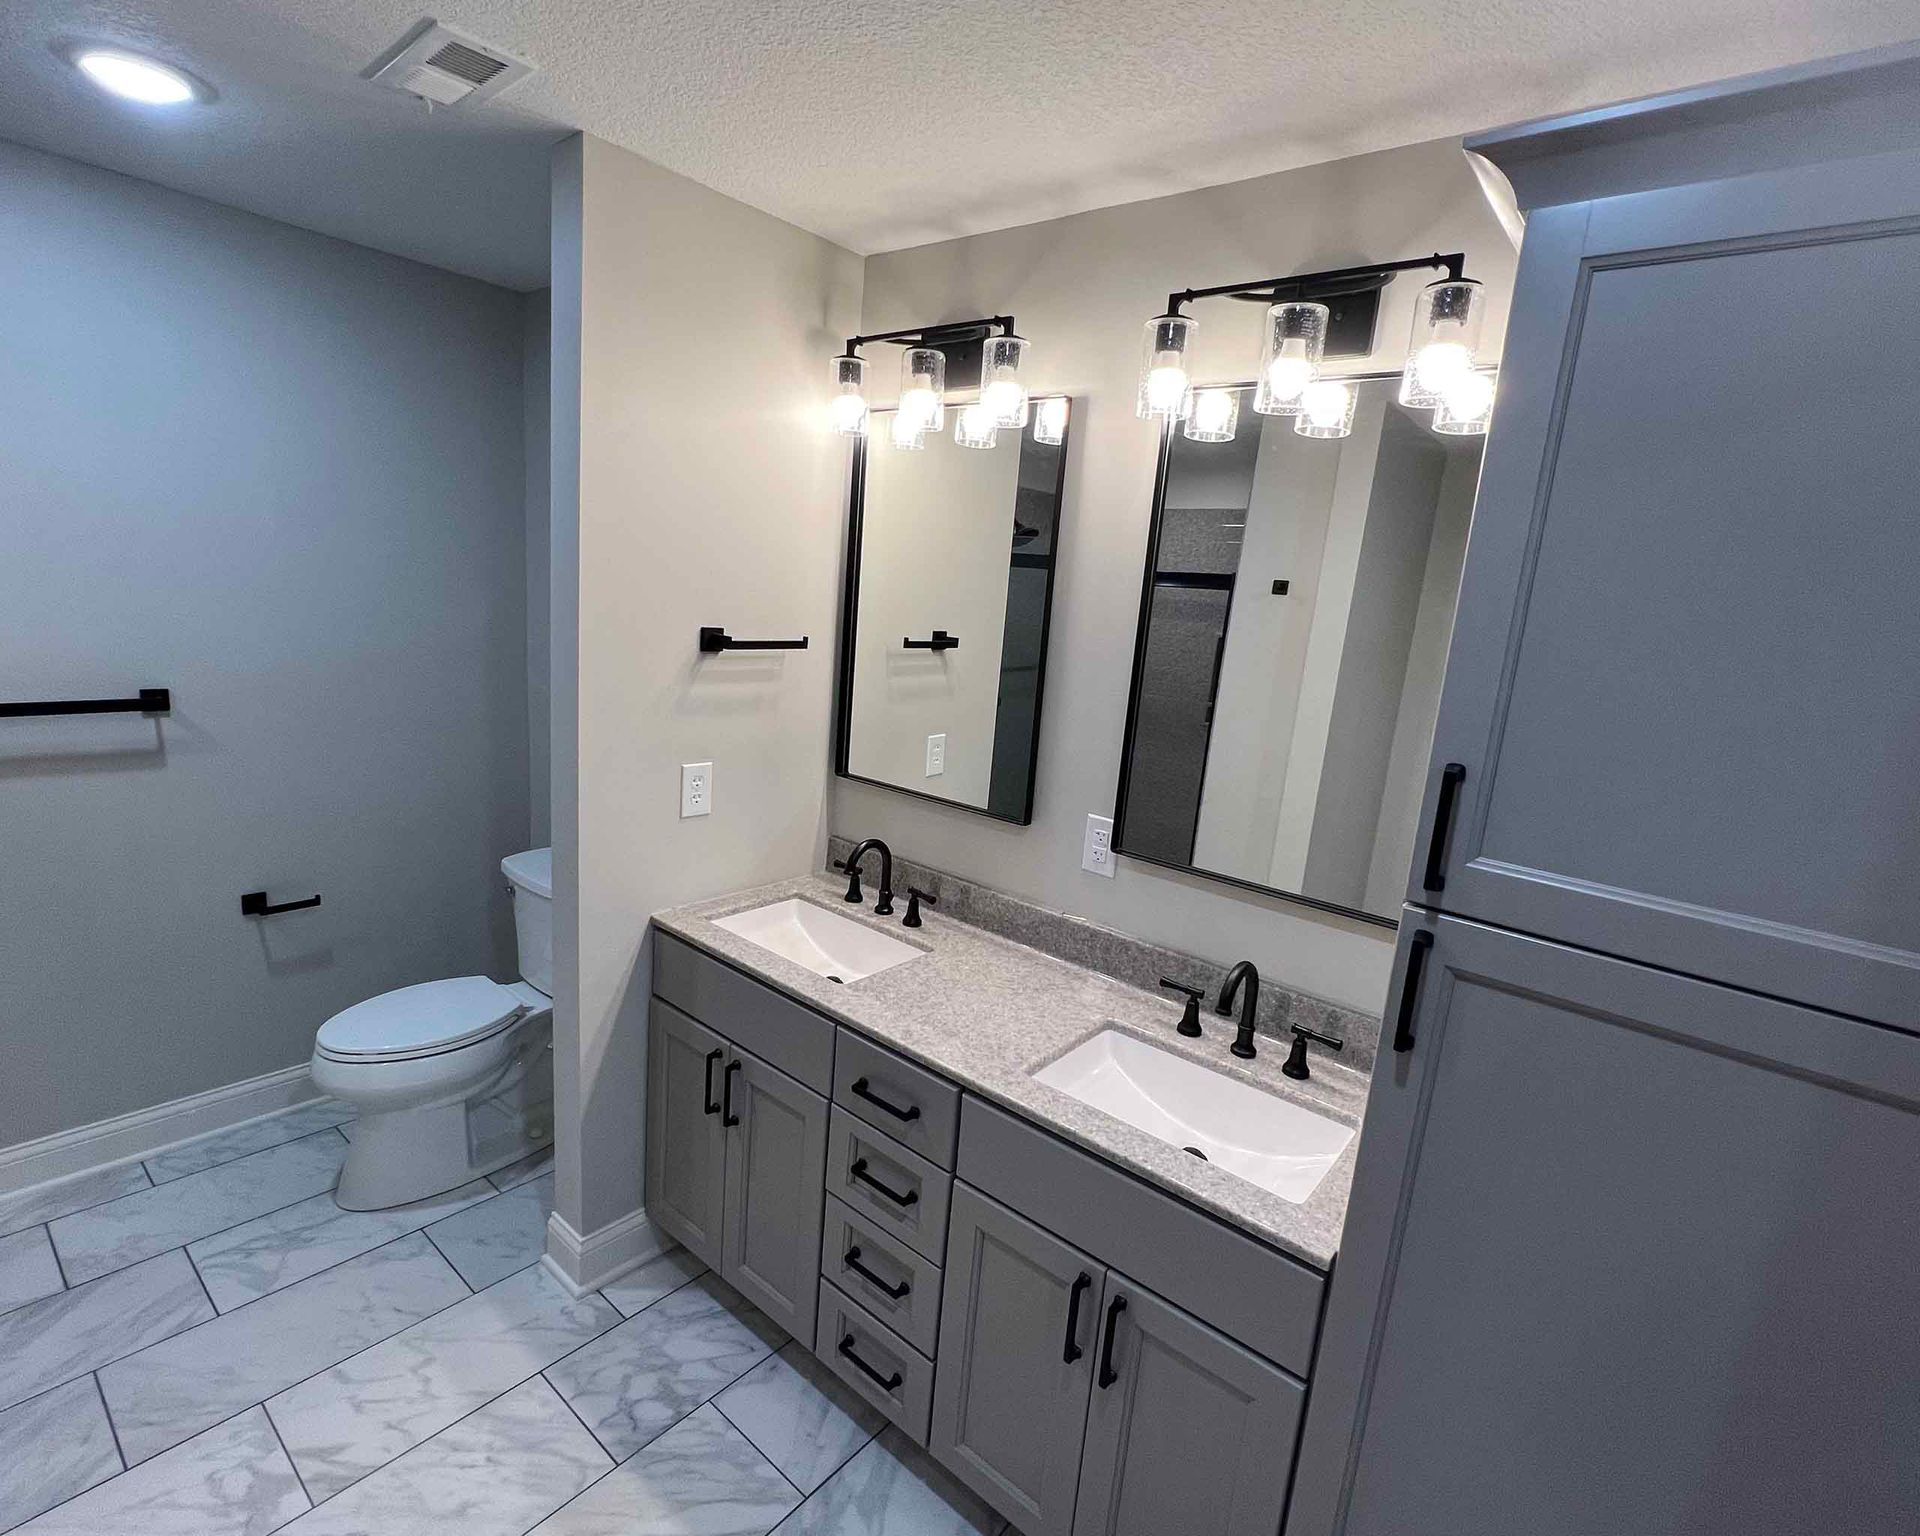 After renovation photo of a modern bathroom with sleek new fixtures, marble tiles, and improved lighting.